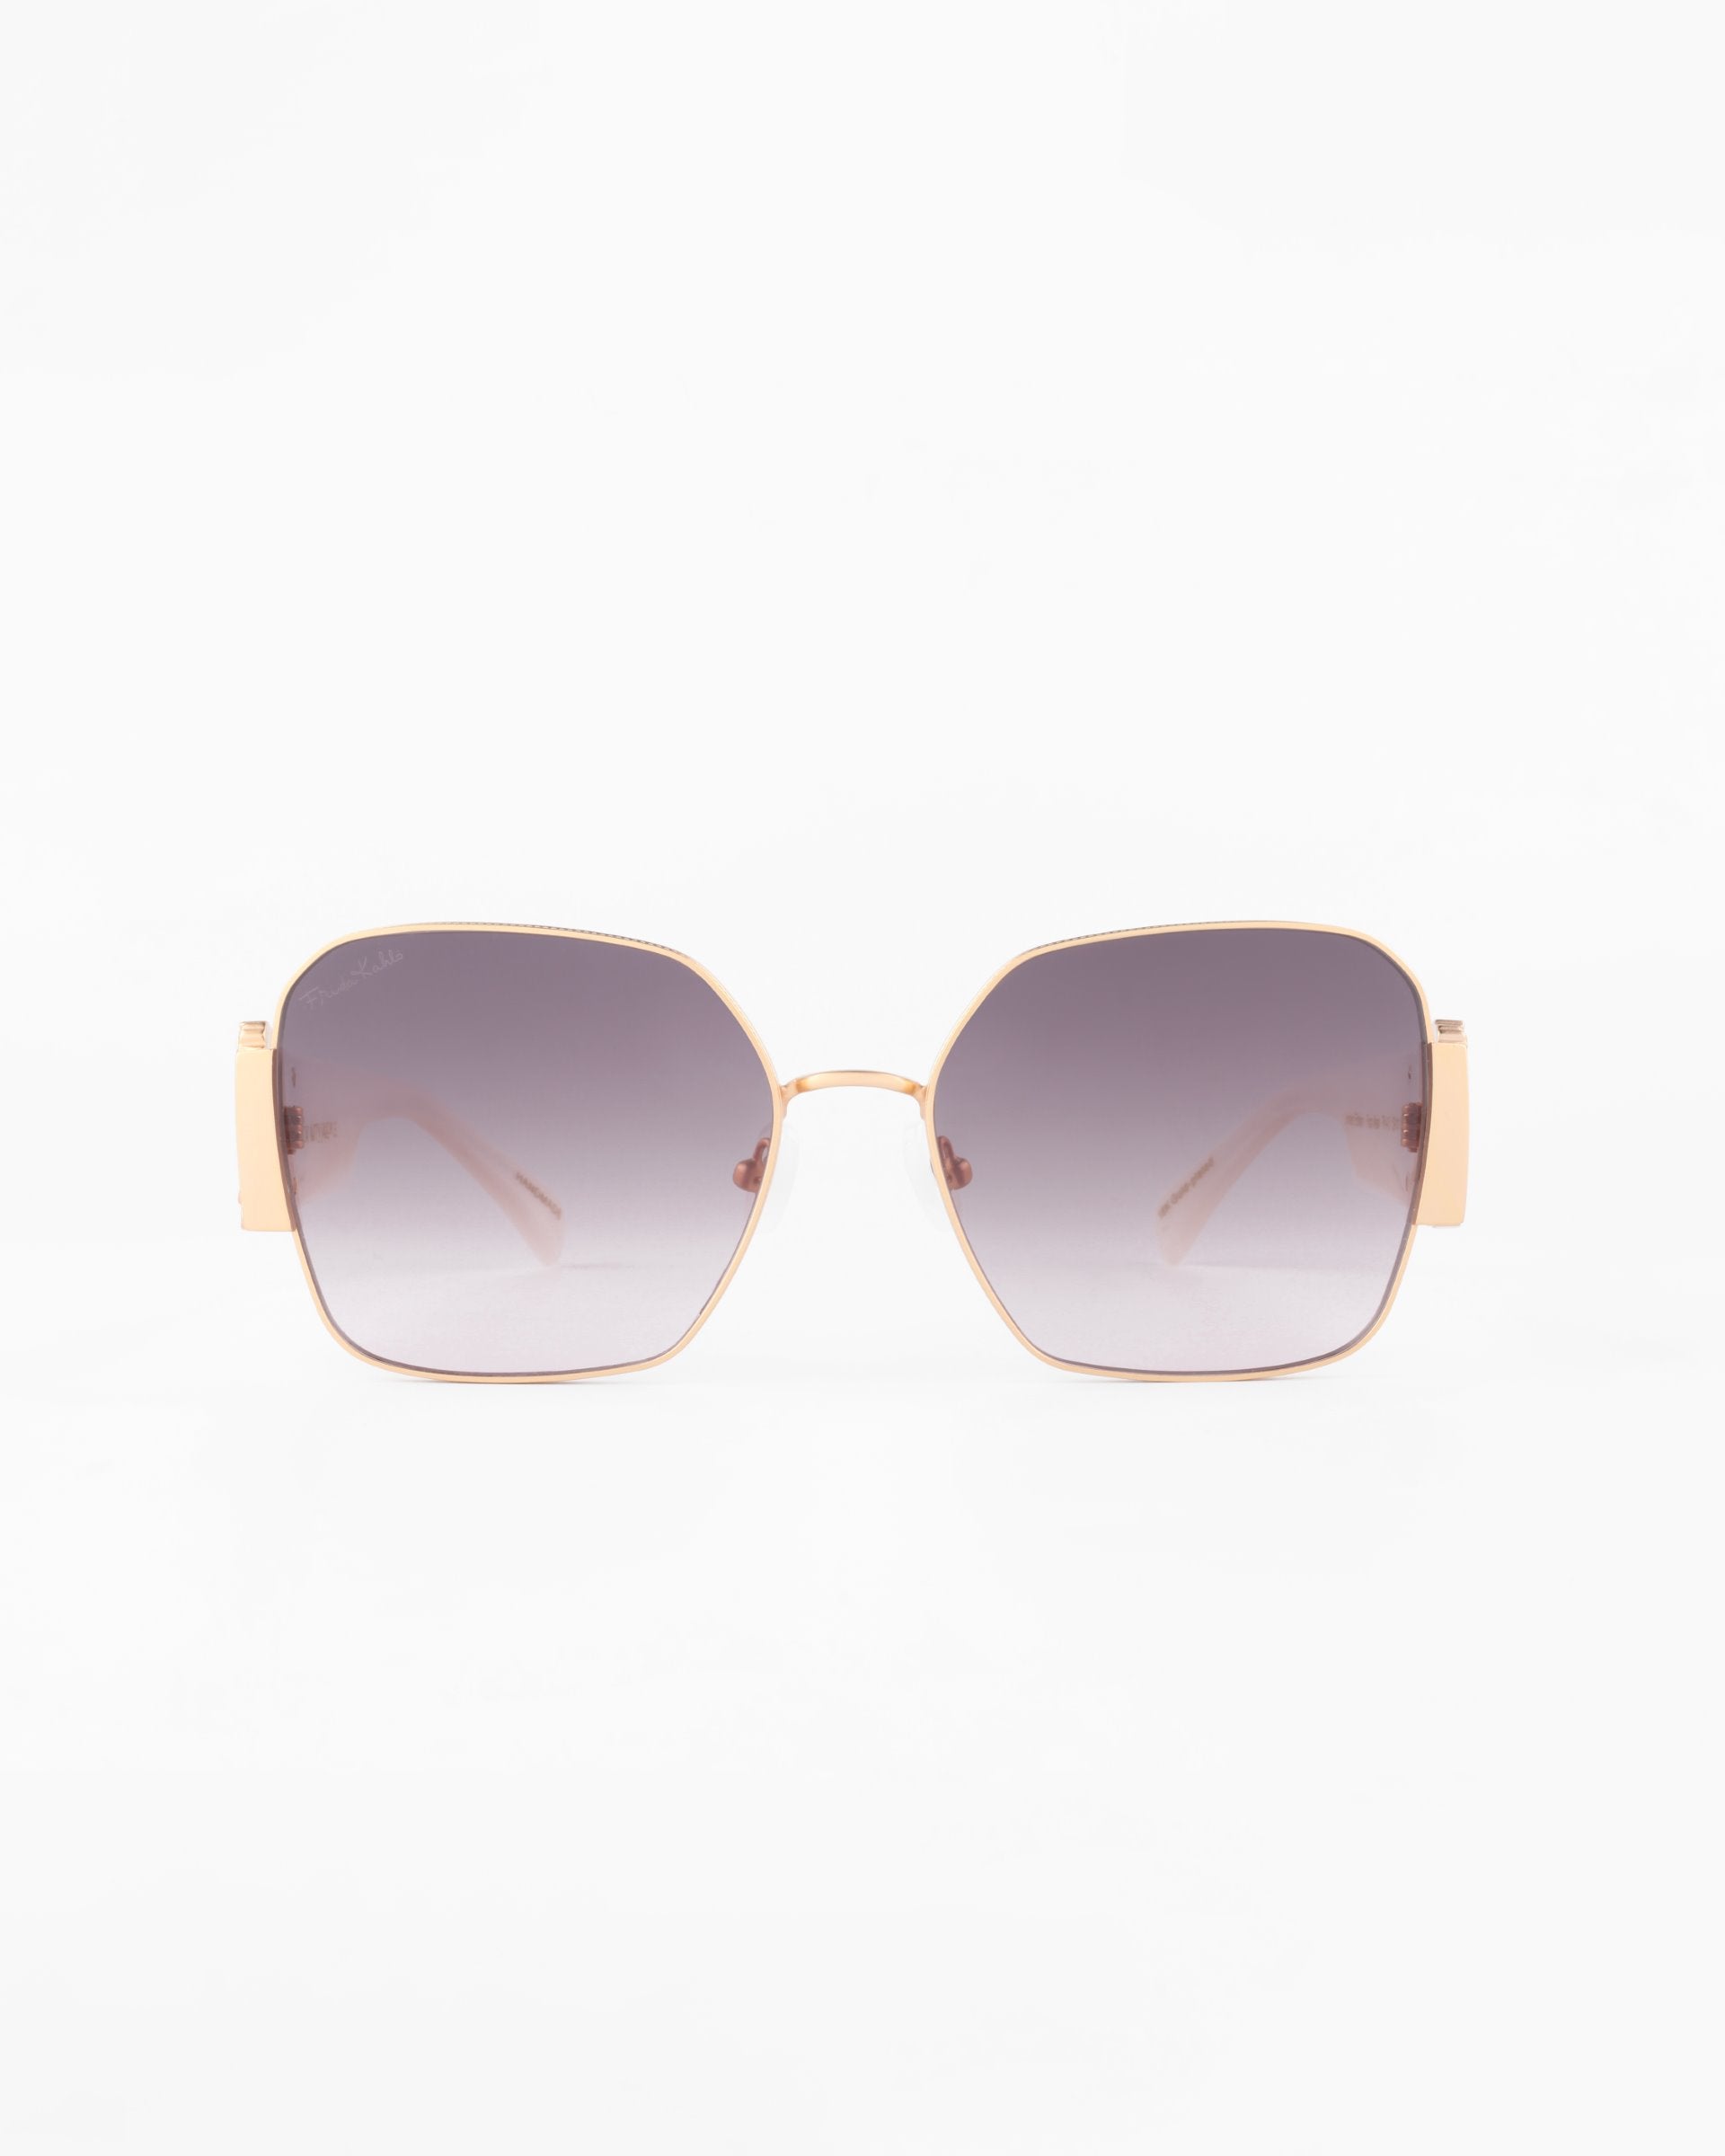 A pair of Frida Mask sunglasses by For Art's Sake® with large, square lenses that have a gradient tint from dark gray to clear. Made with gold-plated stainless steel and ultra-lightweight nylon lenses, they offer 100% UVA & UVB protection. The sunglasses have thin arms and a minimalist design, set against a white background.